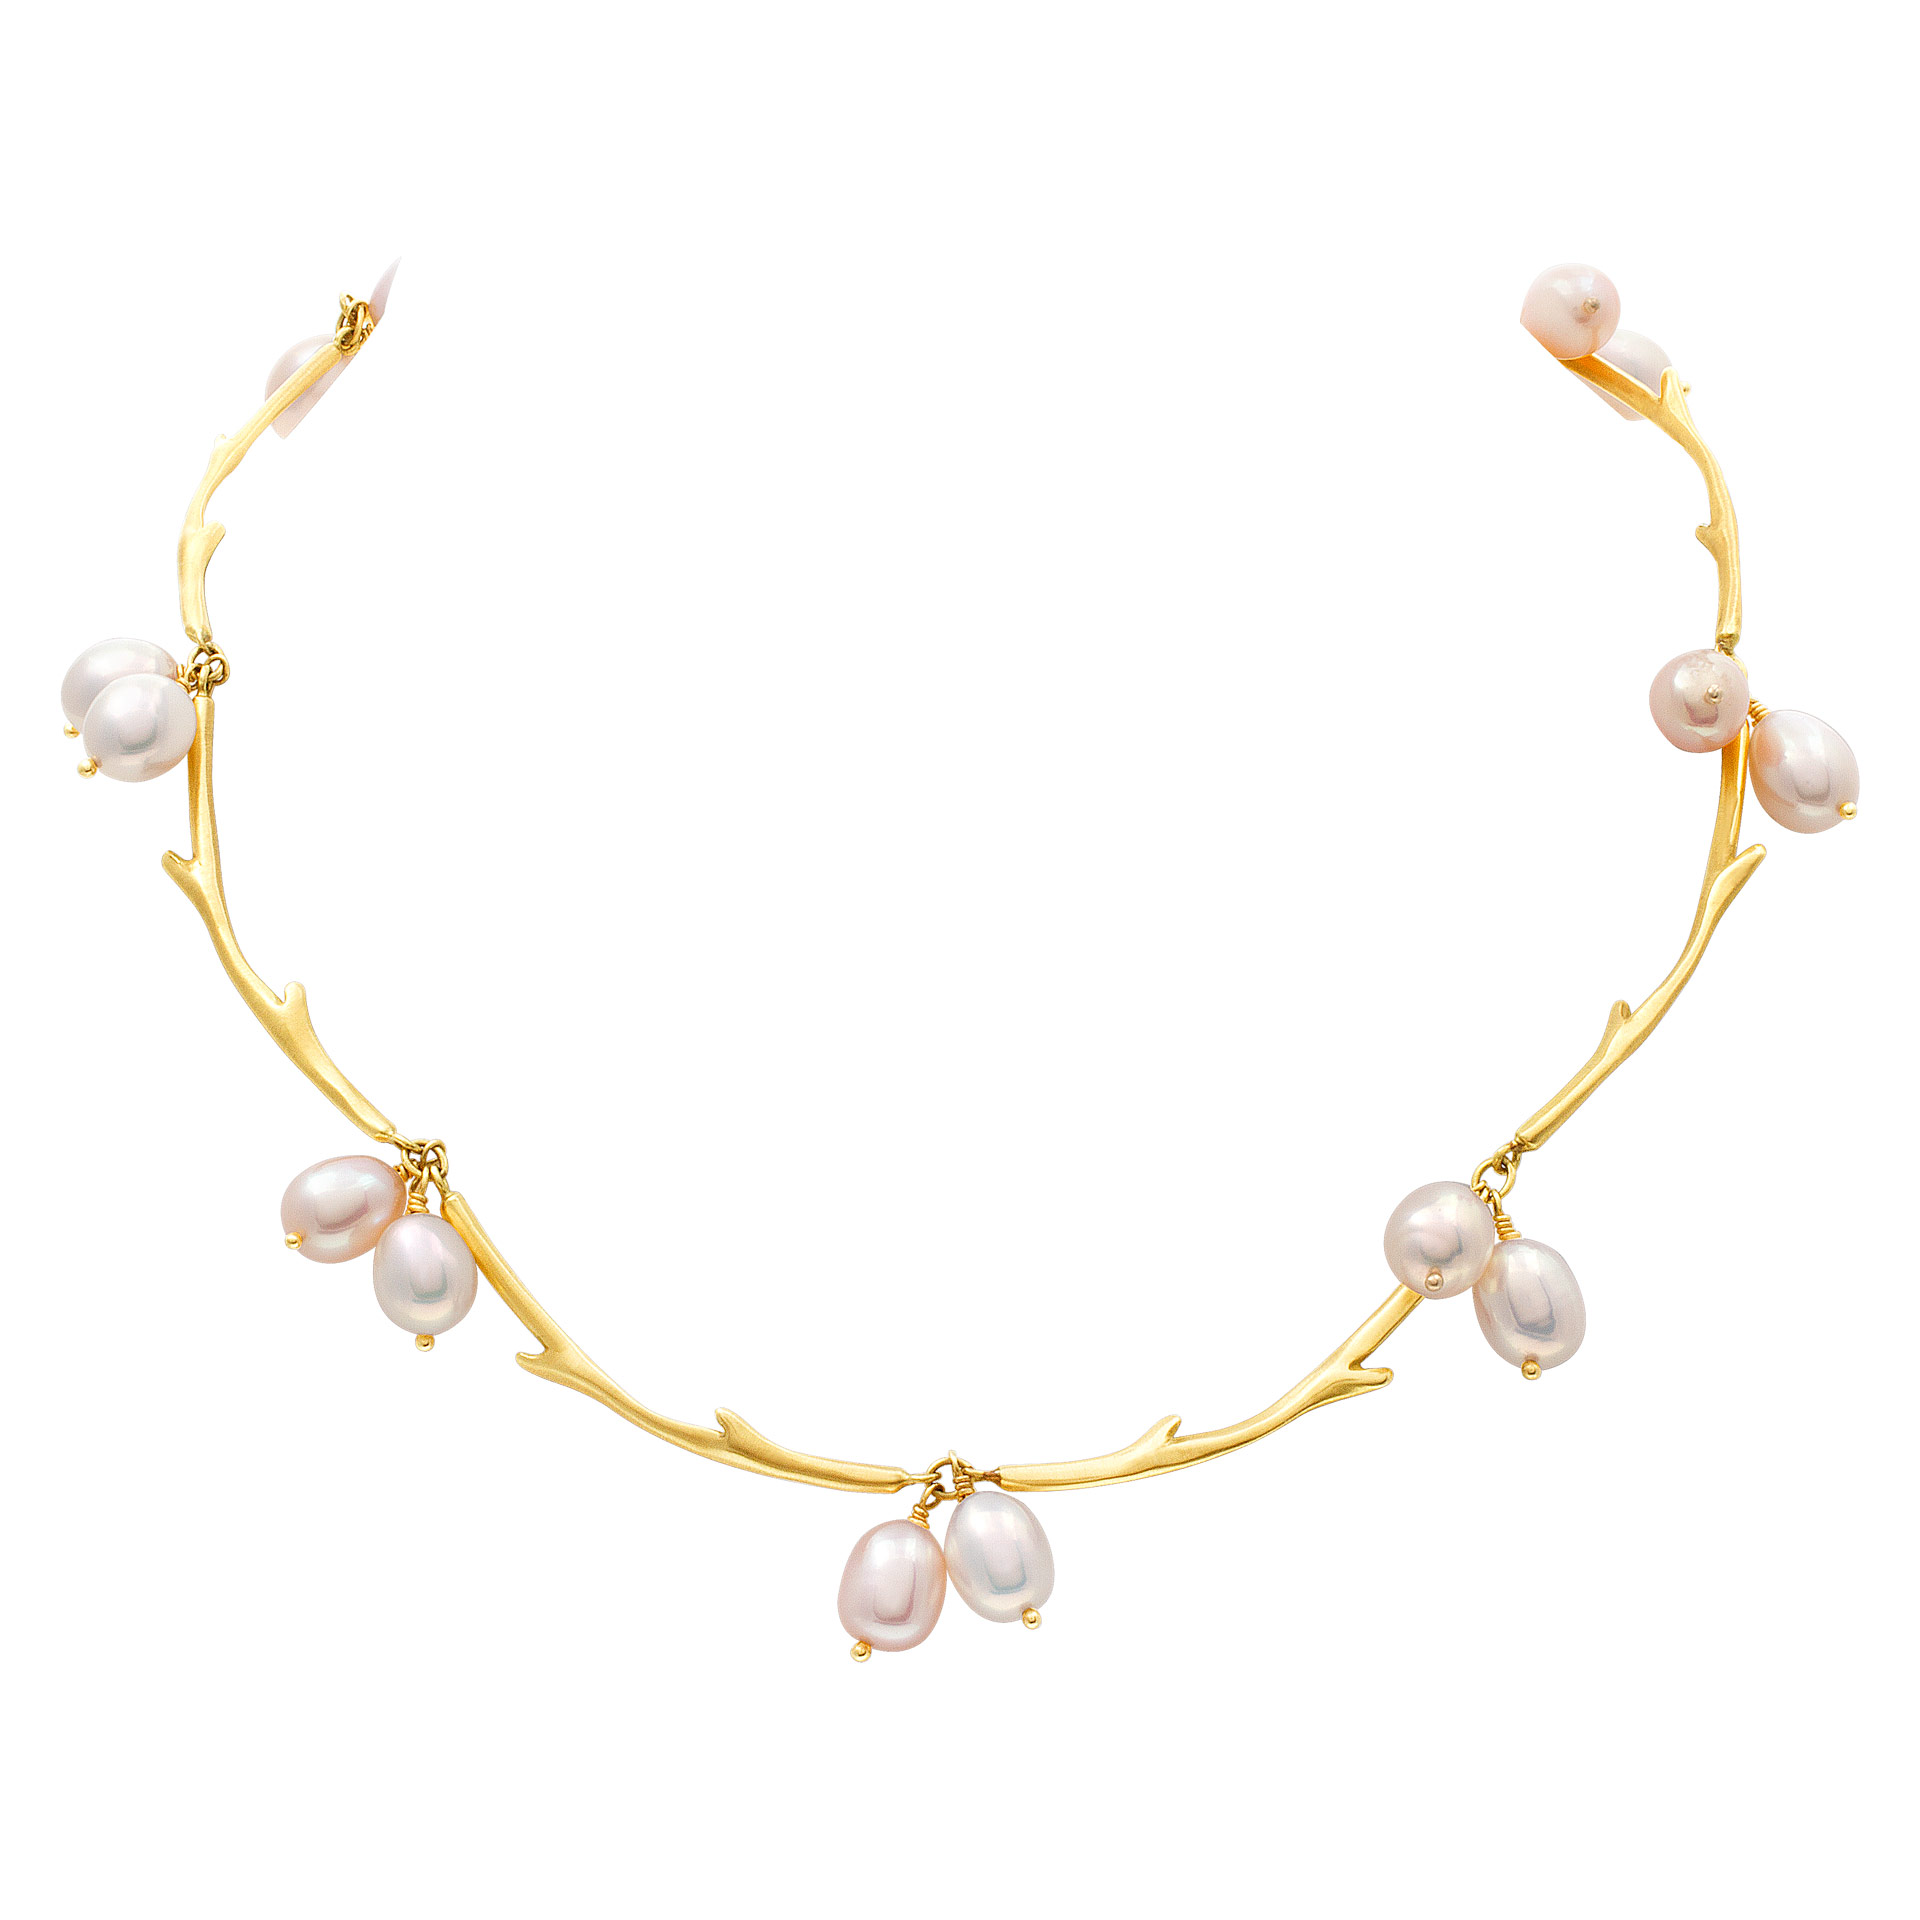 Oval fresh water pearls necklace in 18k gold. 9.5 x 10mm pearls. 15 inches.